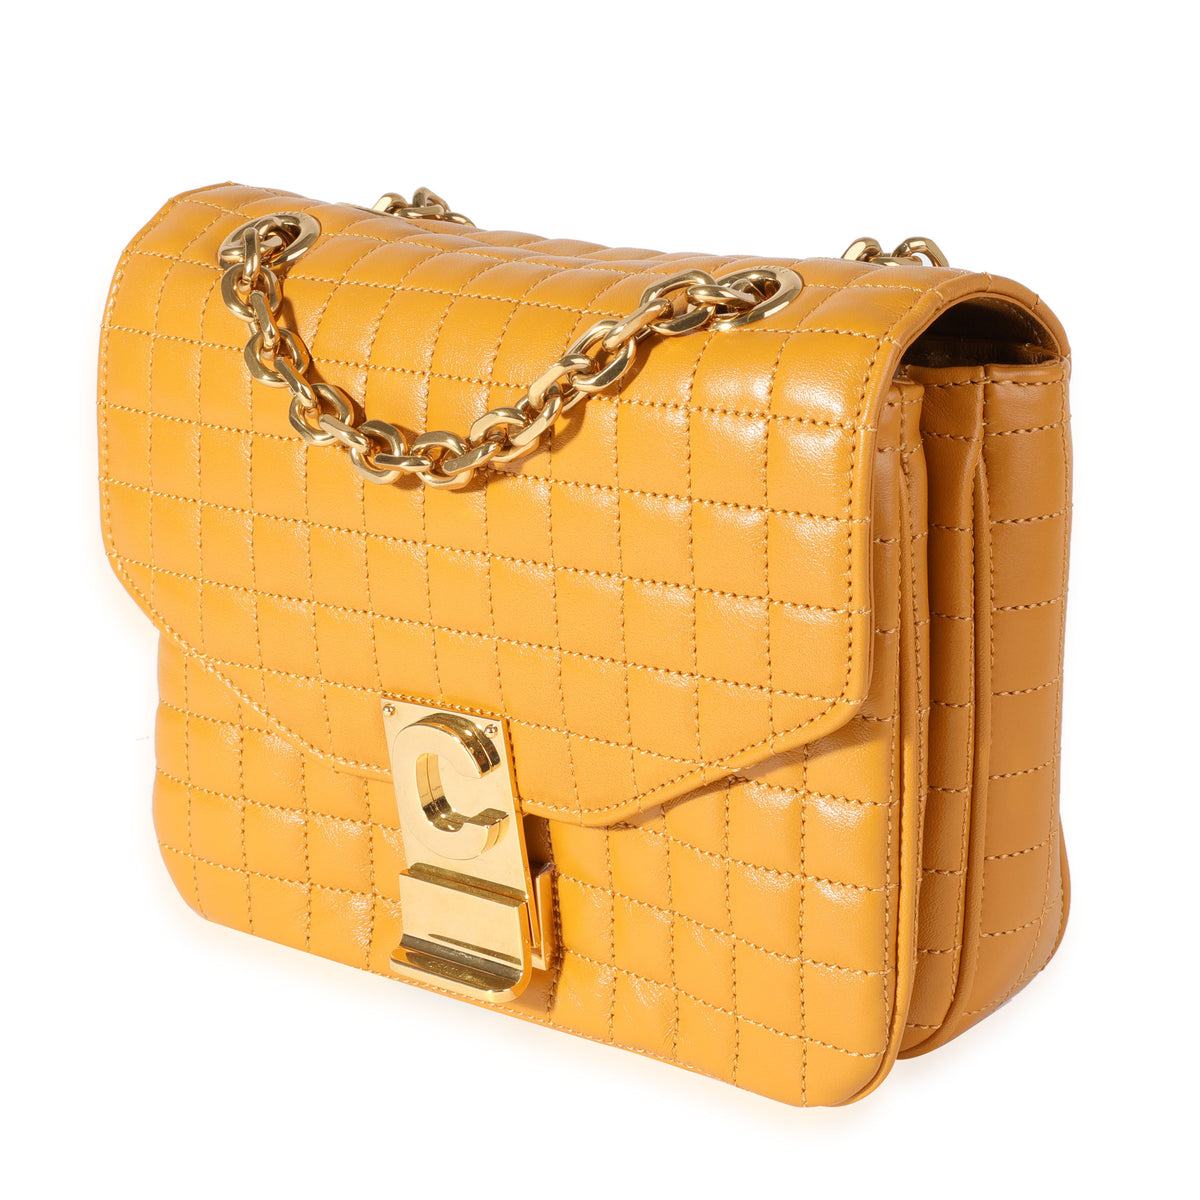 Celine Ocre Quilted Calfskin Small C Flap Bag